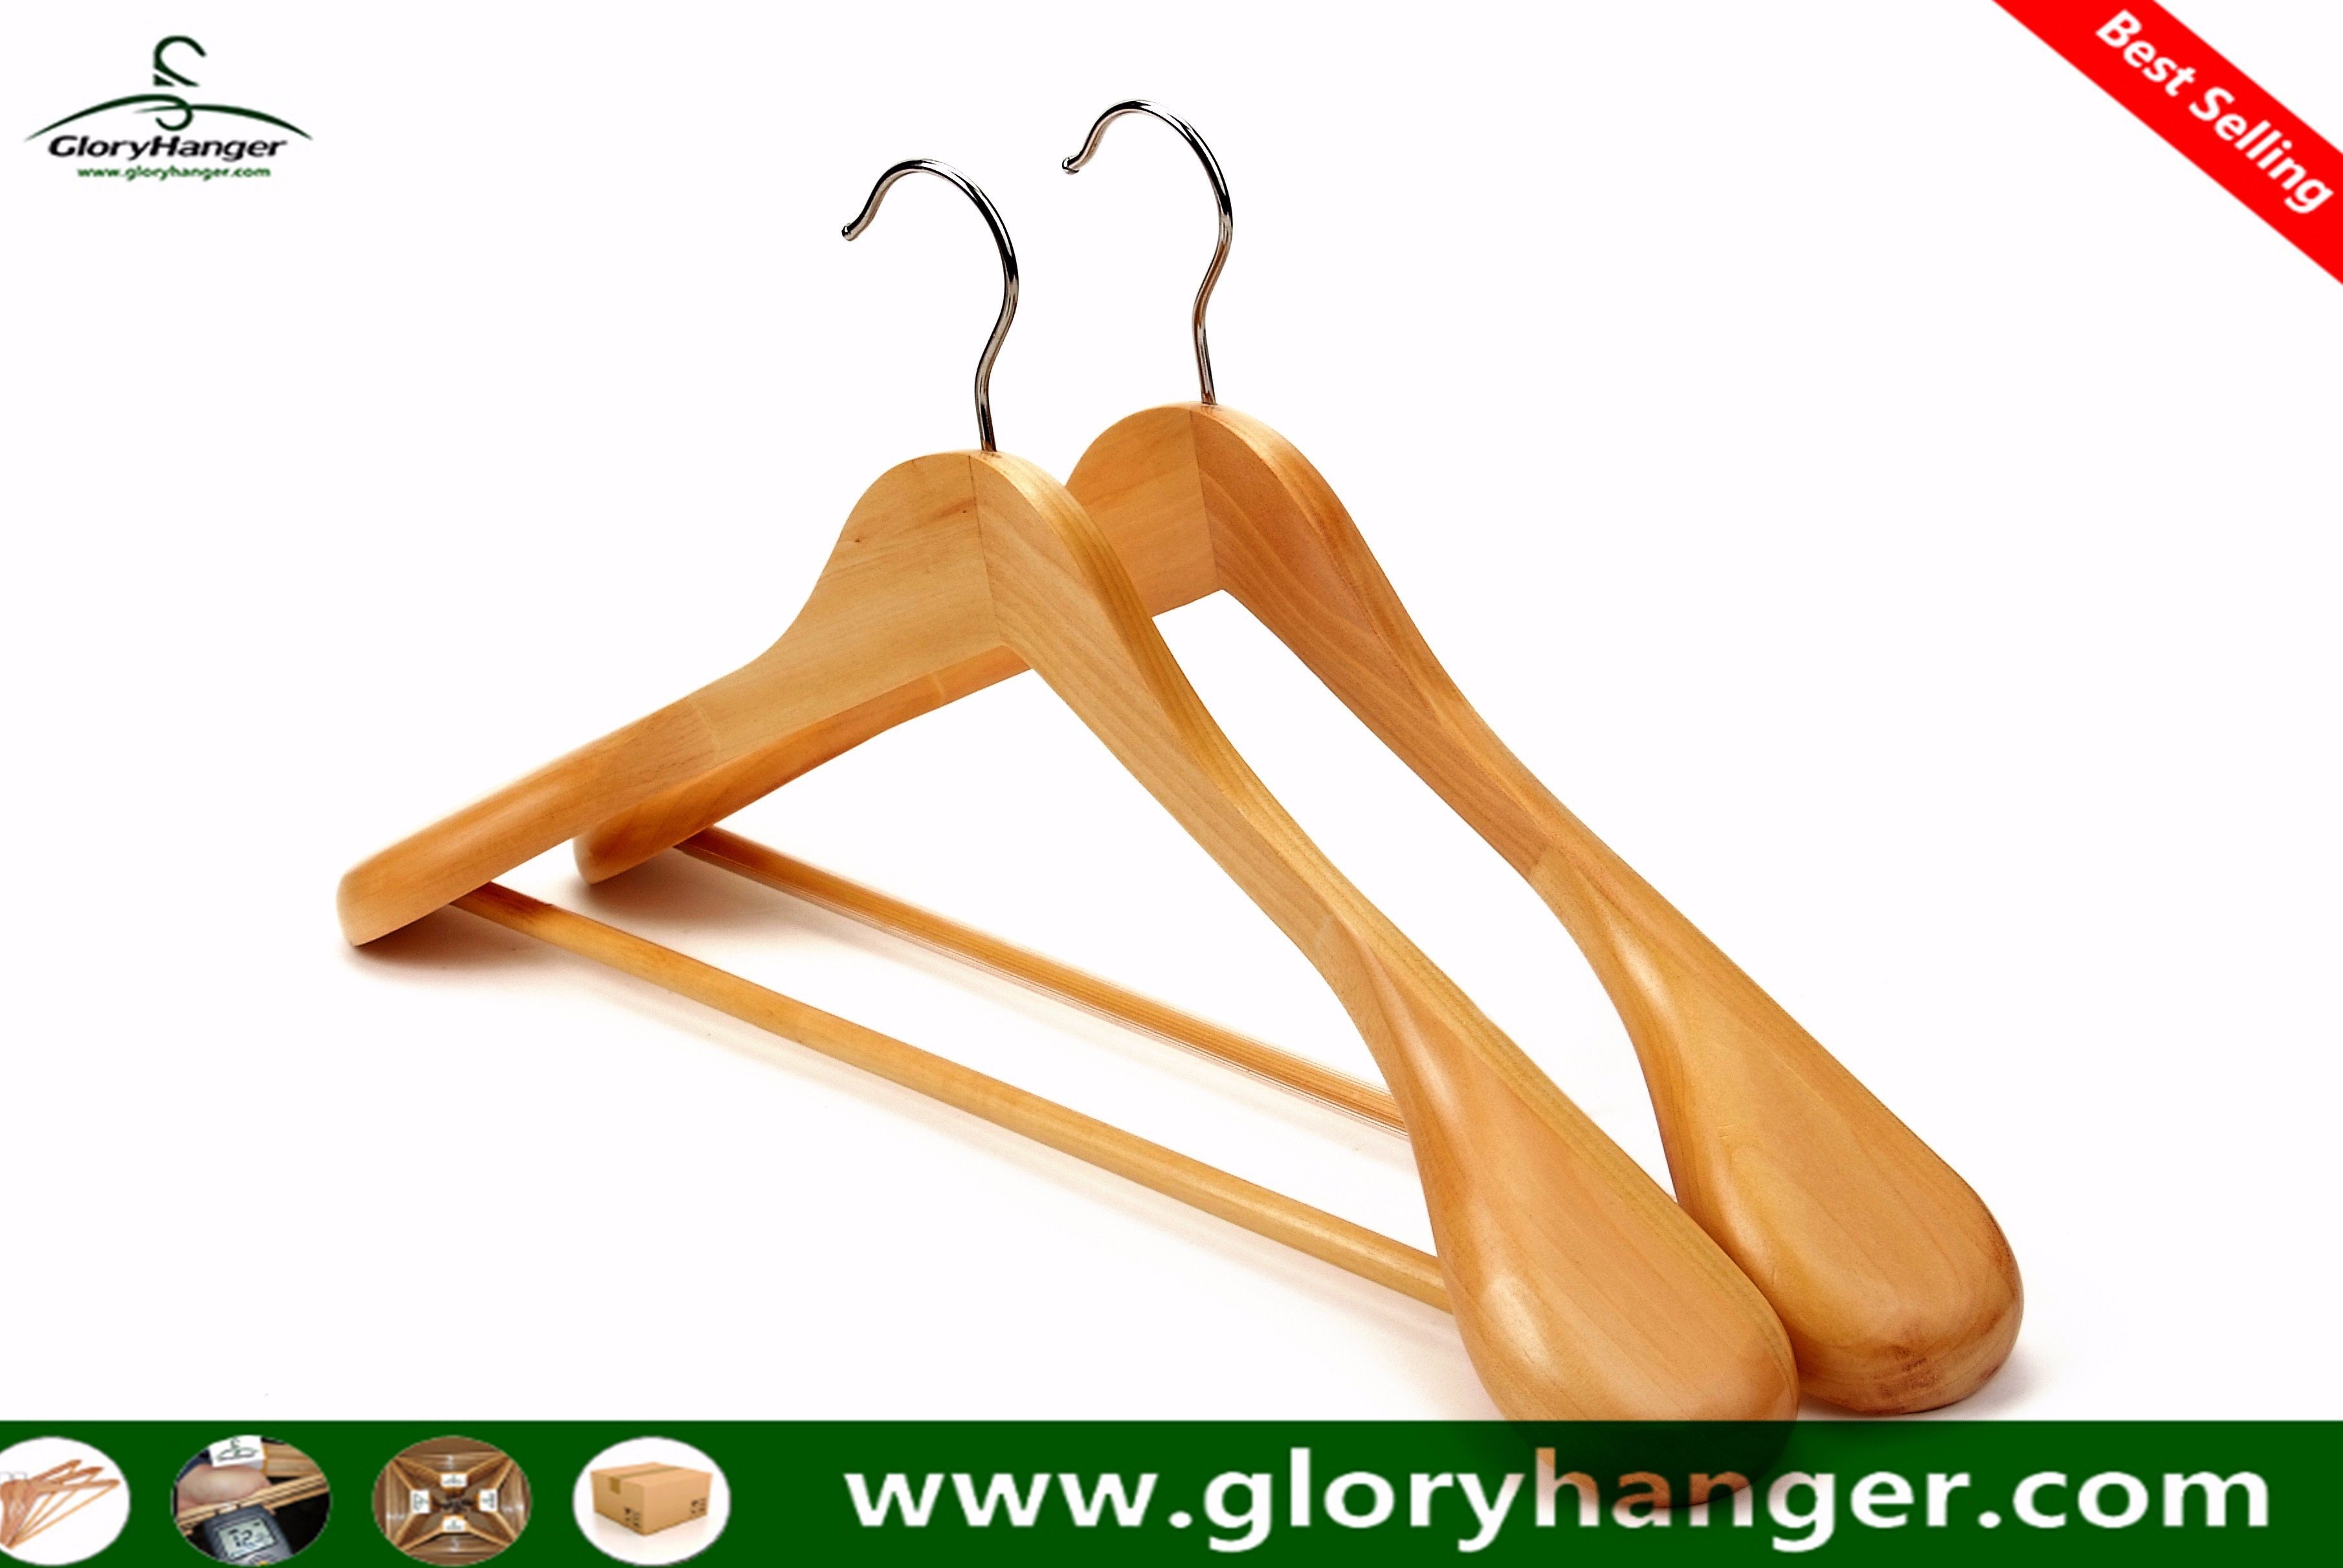 /proimages/2f0j00NtwGIlFEZZbr/luxury-hotel-wooden-coat-clothes-hanger-for-garment-suit-clothing-display.jpg